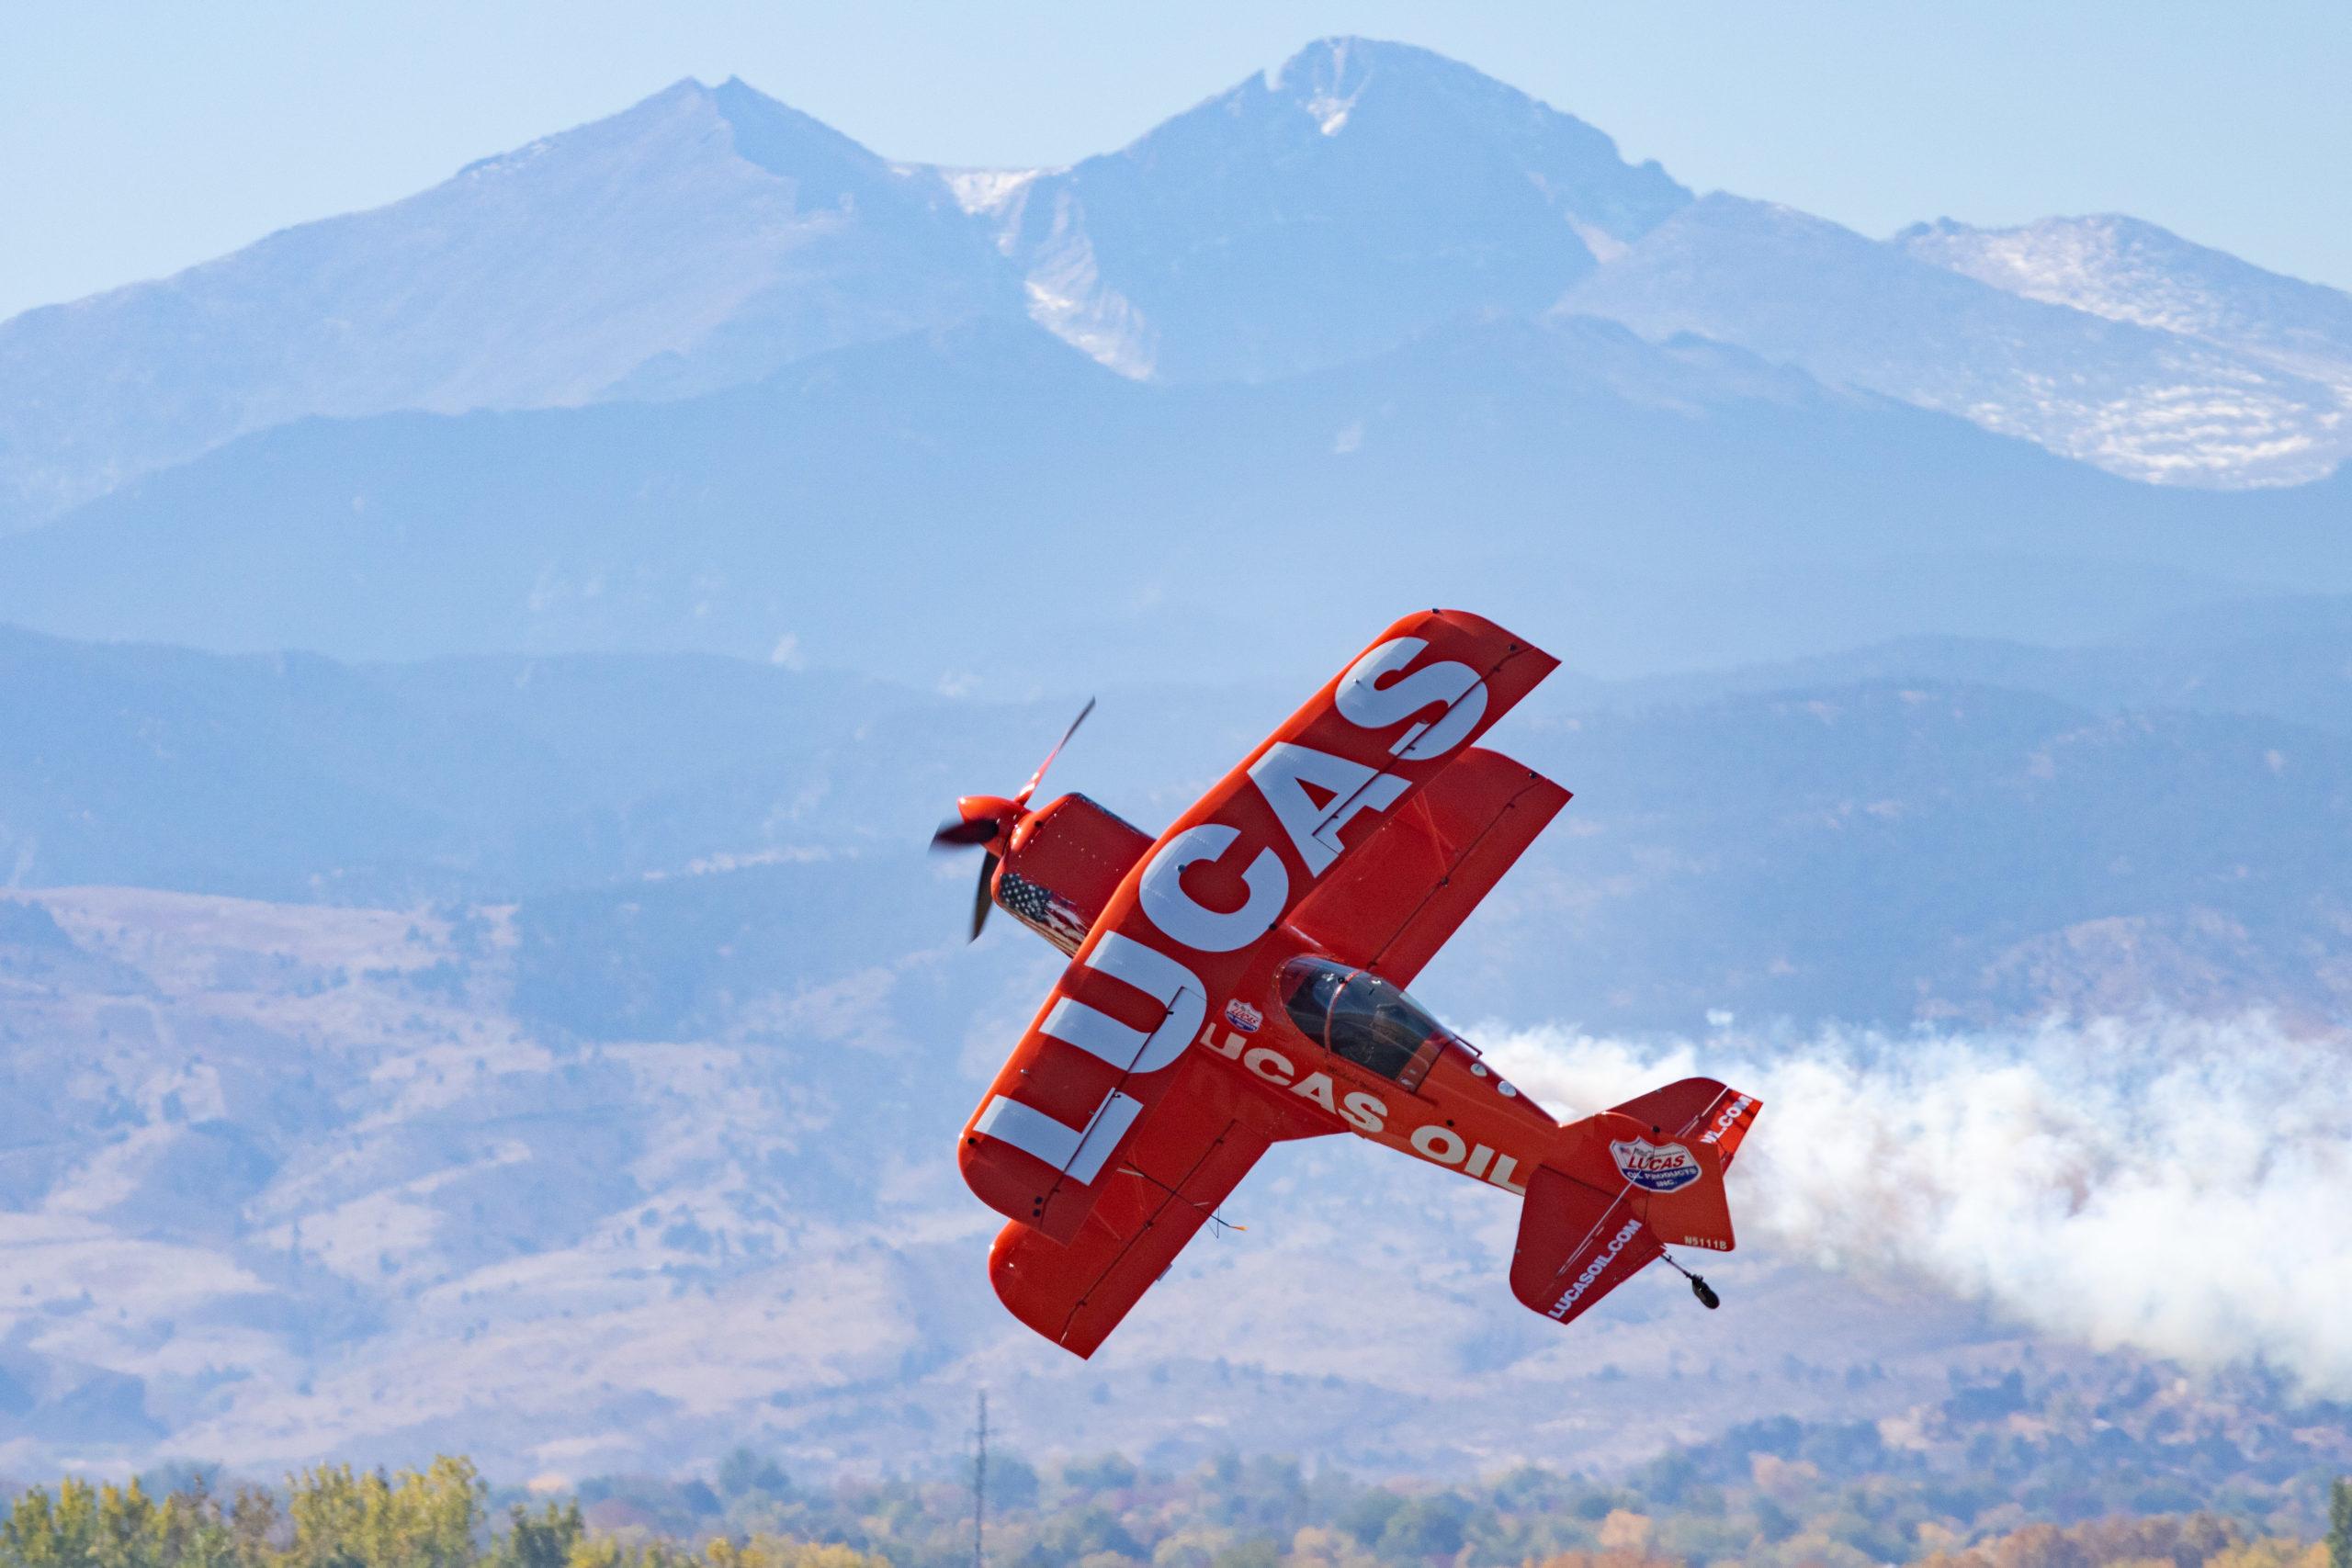 After+19+years+the+Great+Colorado+Airshow+returns+to+Loveland.